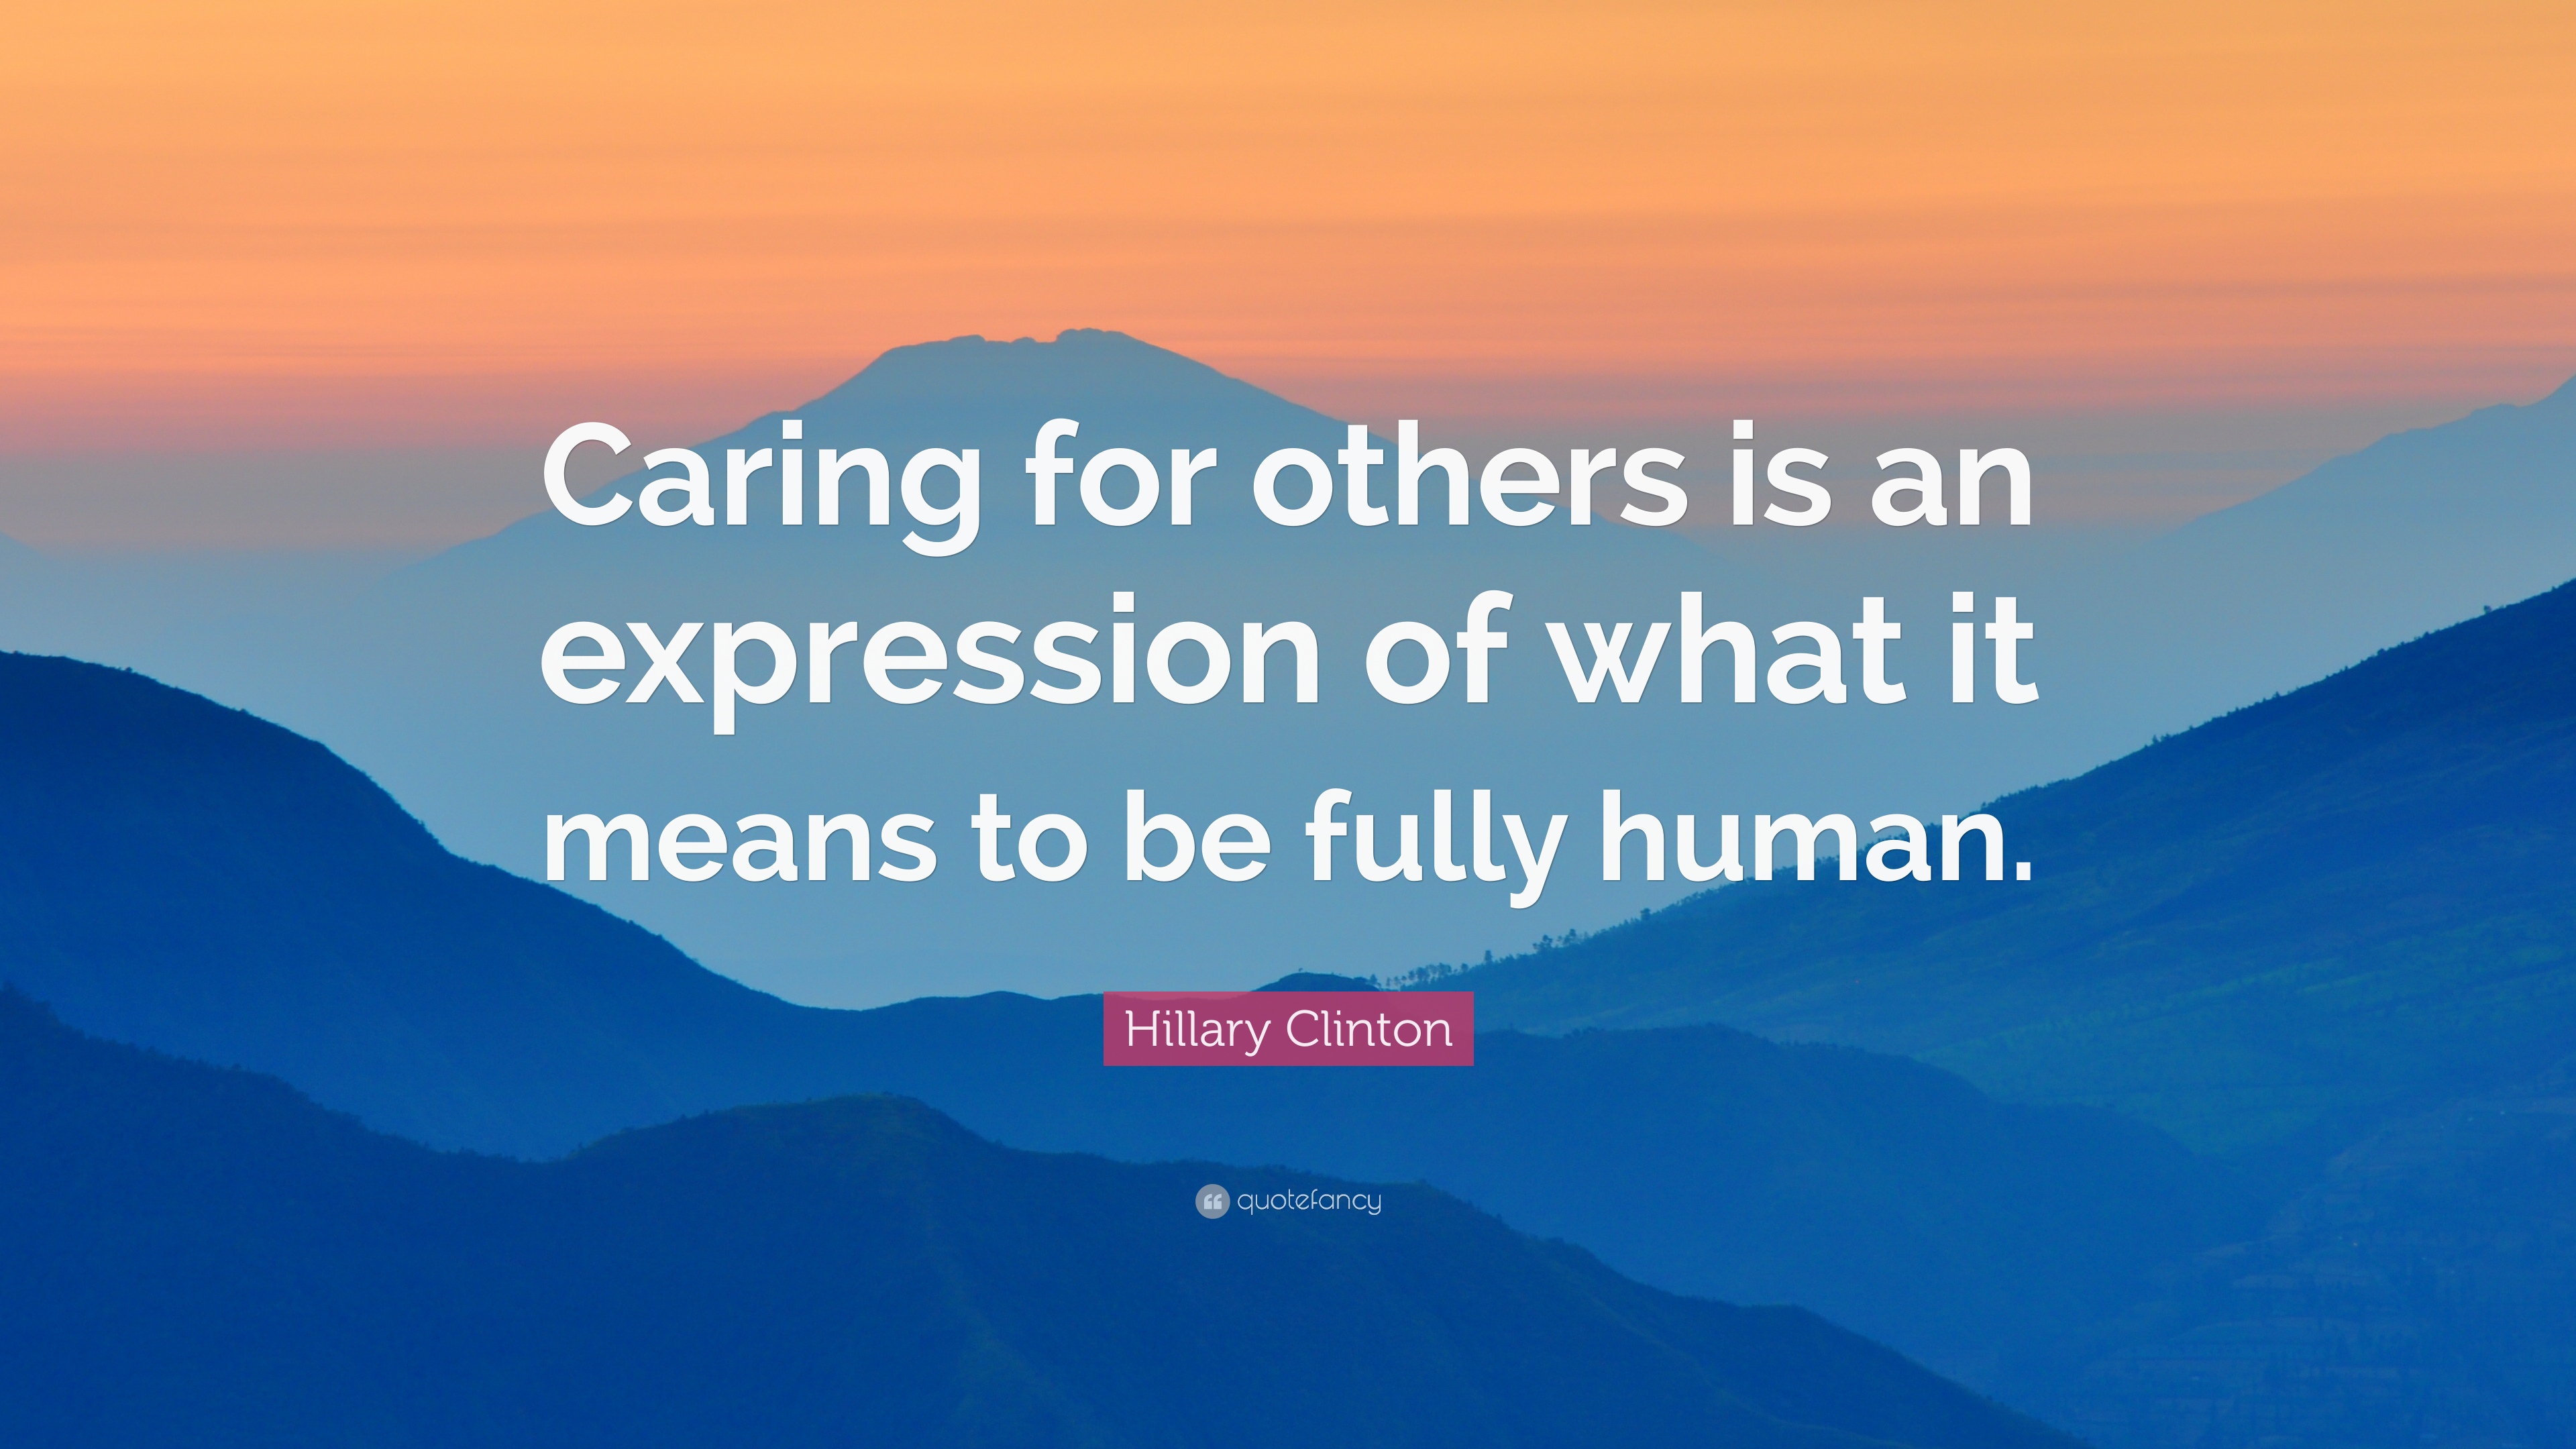 Hillary Clinton Quote: “Caring for others is an expression of what ...